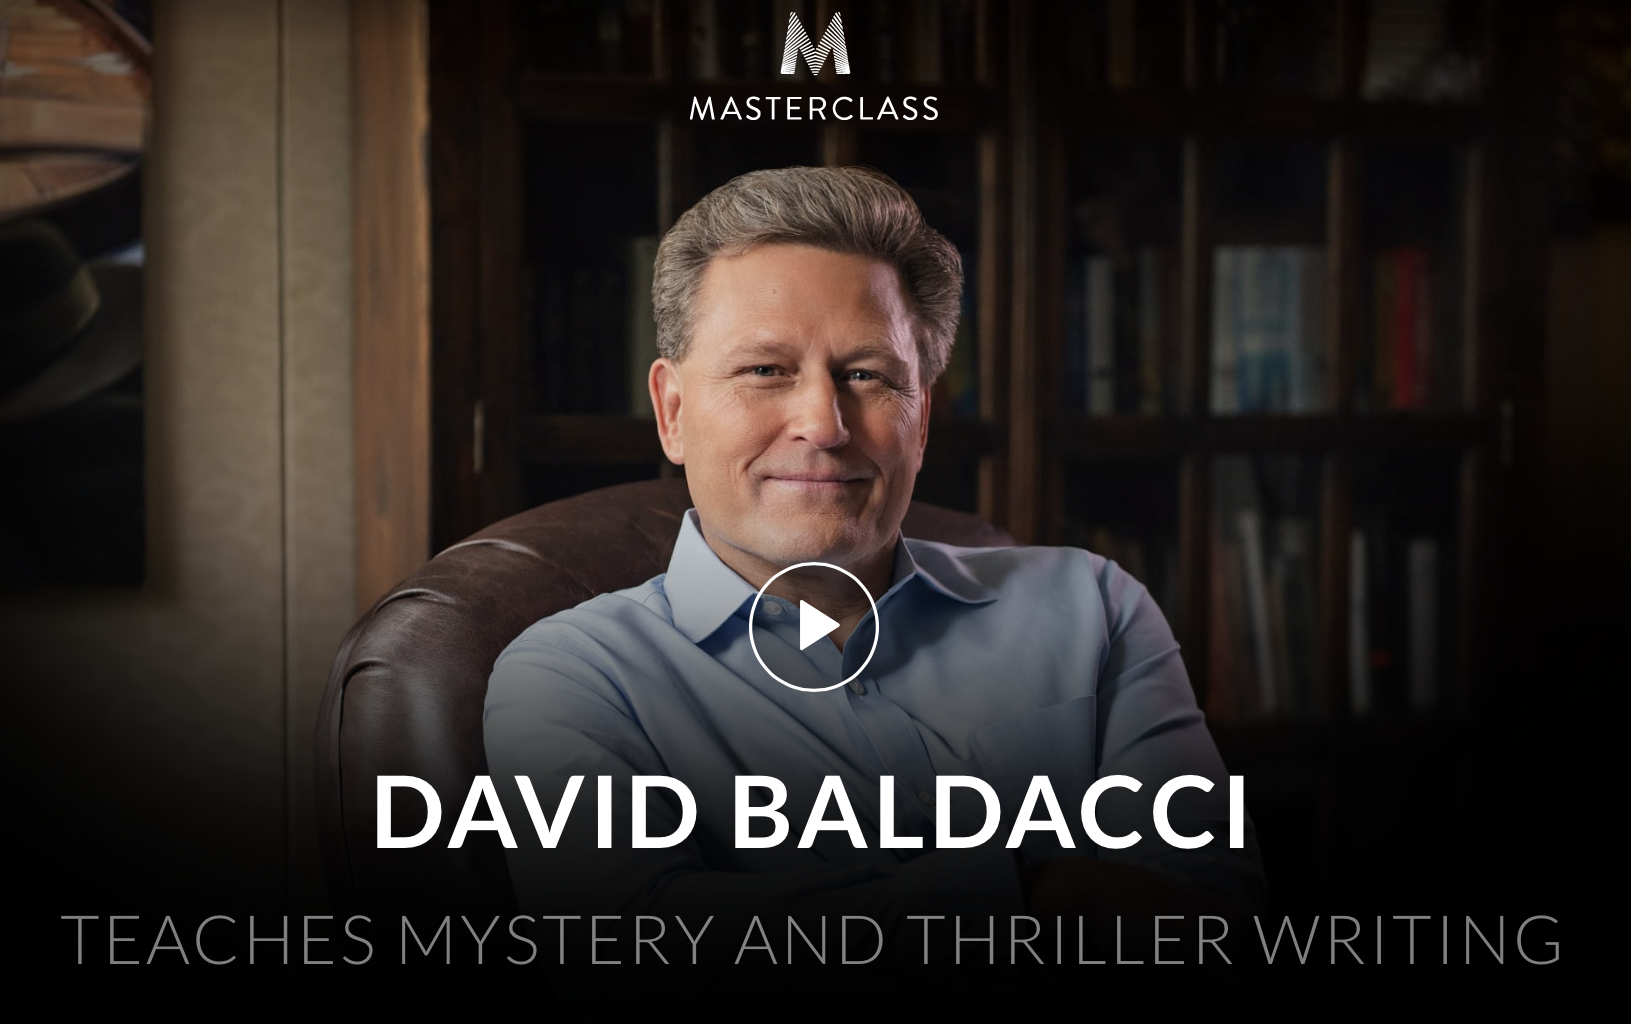 David Baldacci Masterclass Review 2020 Is It Worth Your money?